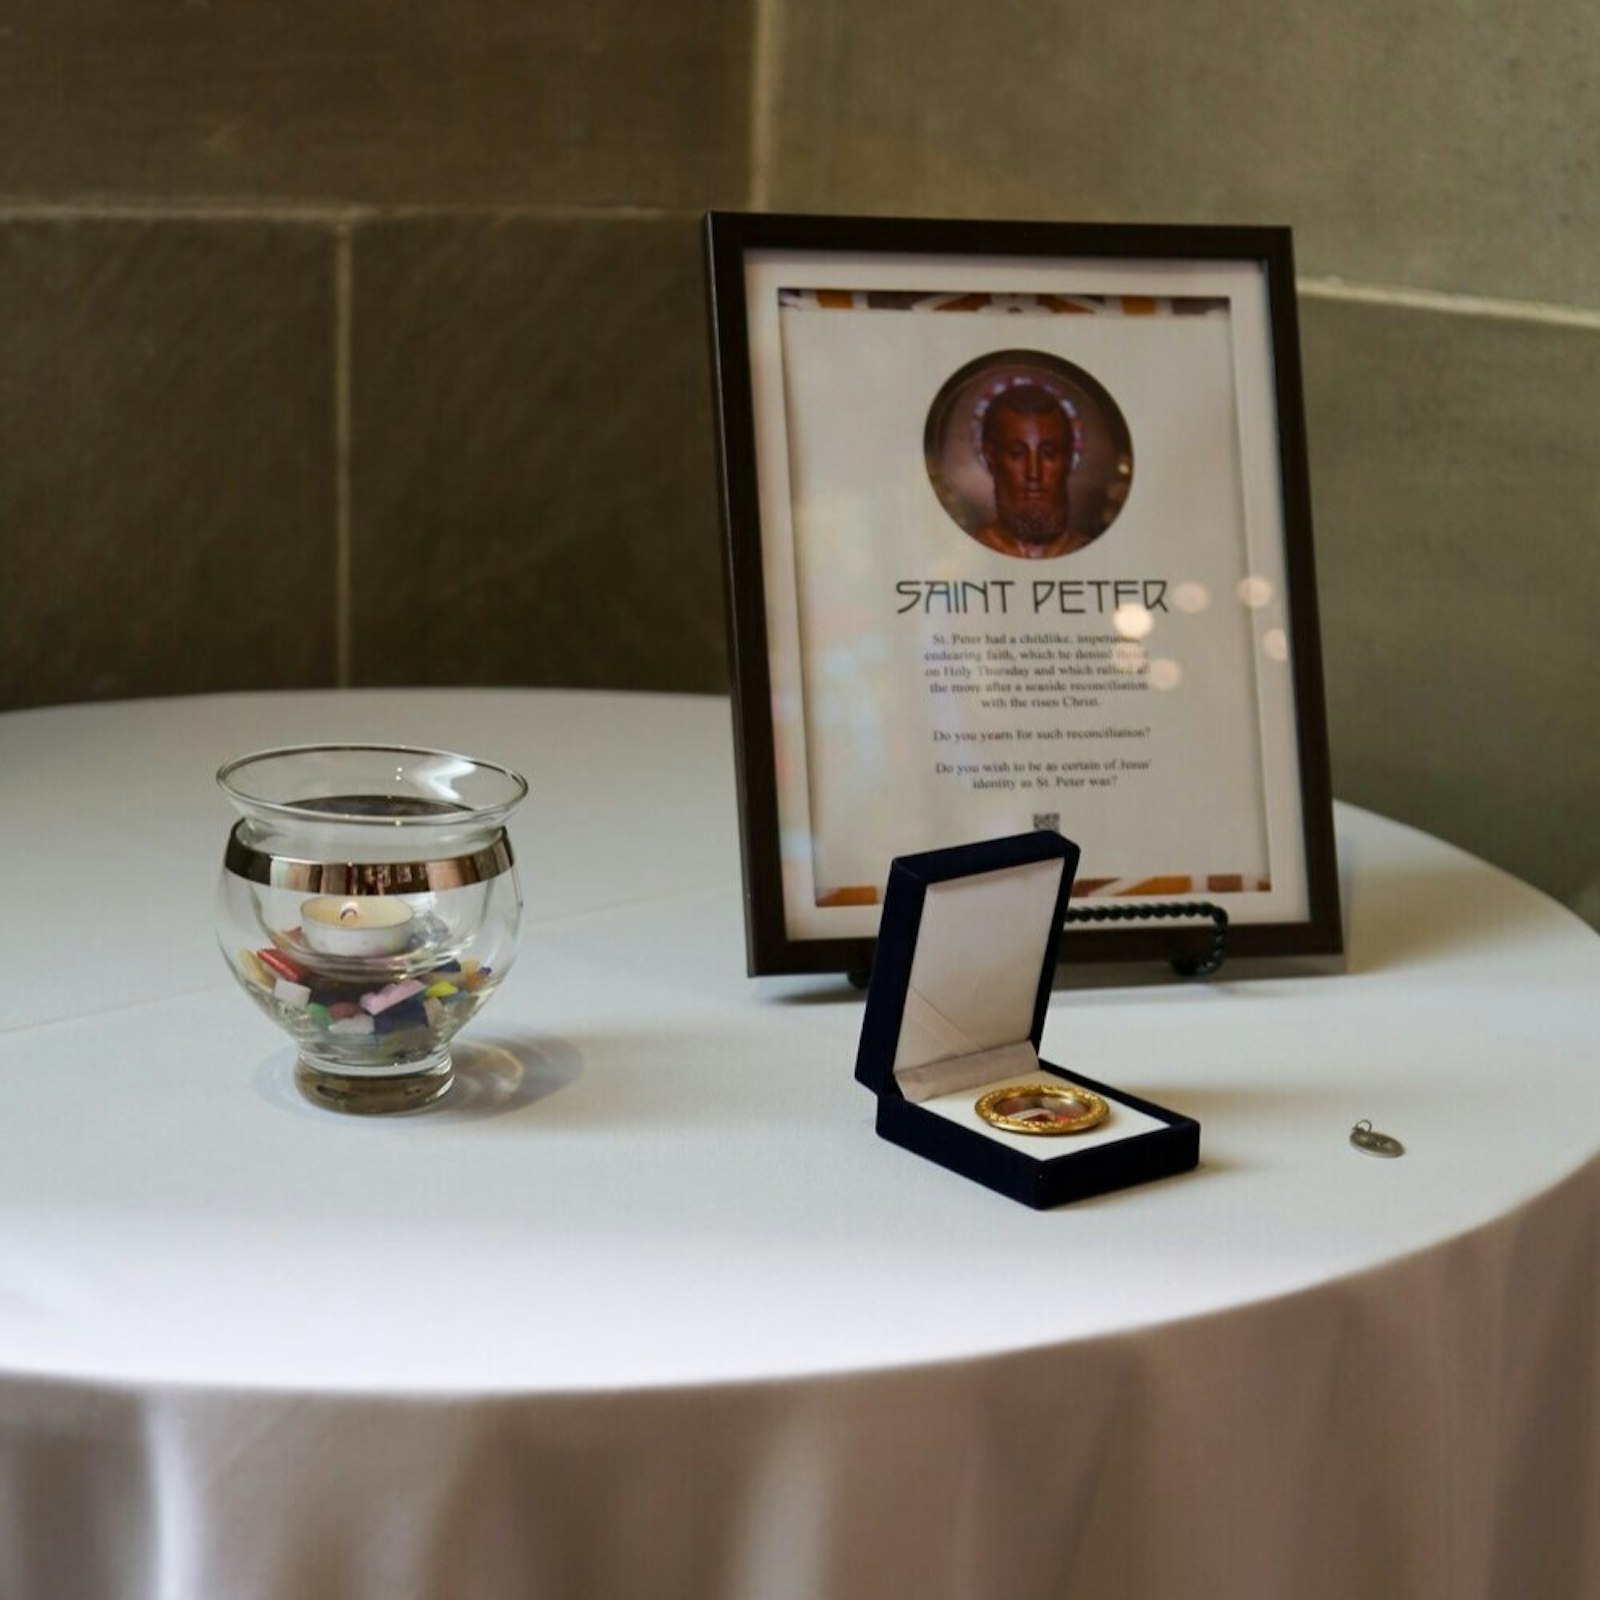 Pilgrims are invited to bring their intentions to the saints, such as St. Peter, whose relic is pictured here.